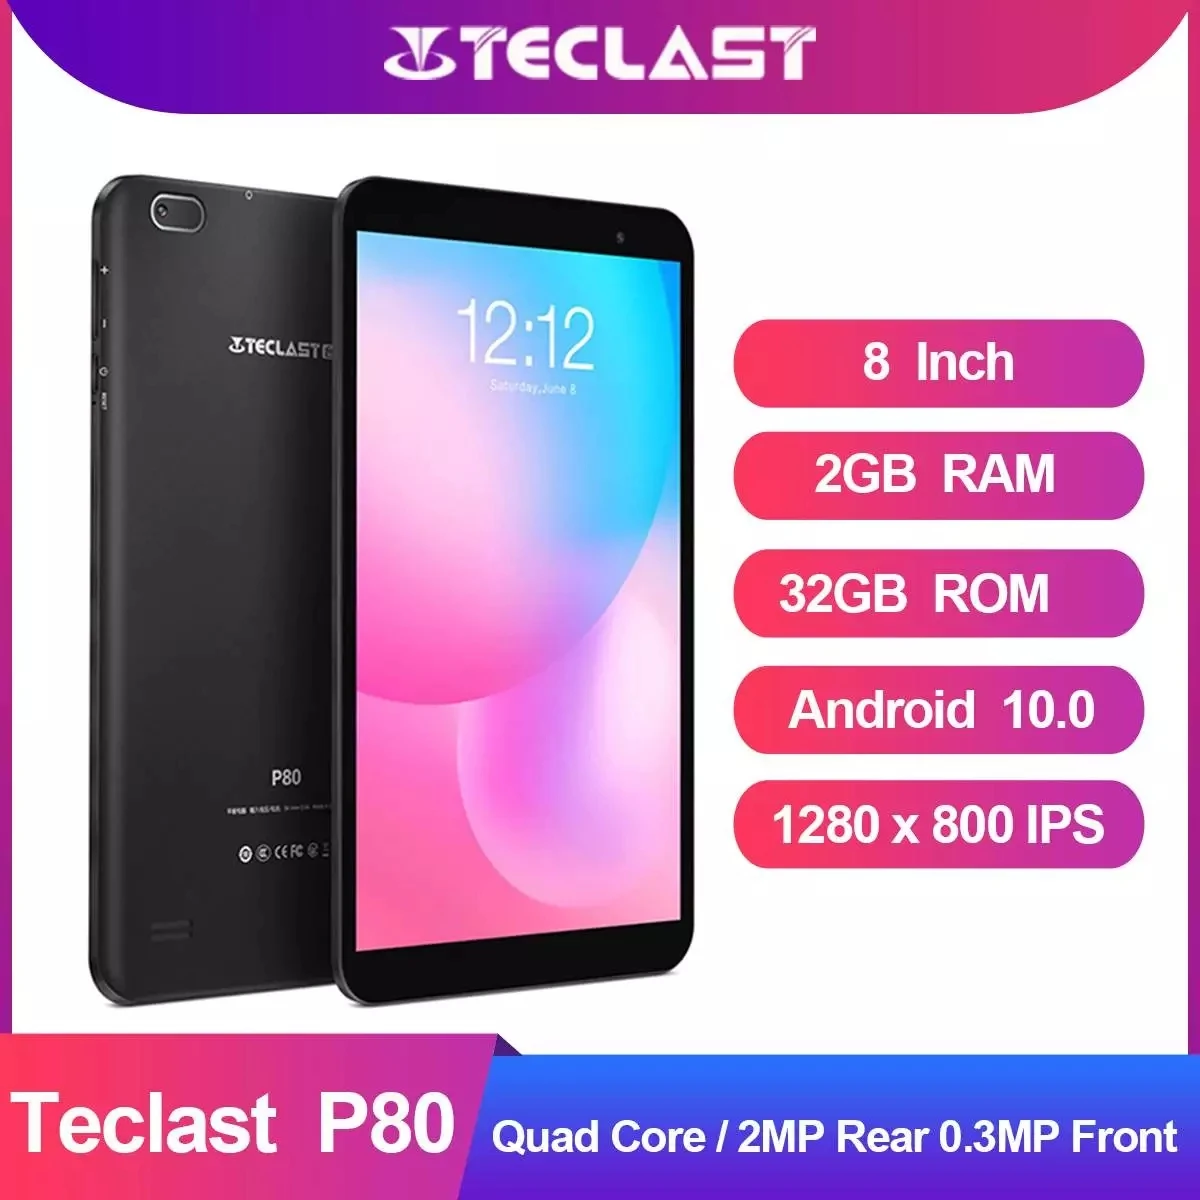 Teclast P80 8" Tablet PC Android 10 2GB RAM 32GB ROM Allwinner A133 1280 x 800 IPS Dual WiFi Bluetooth-compatible 5.0 Tablets PC